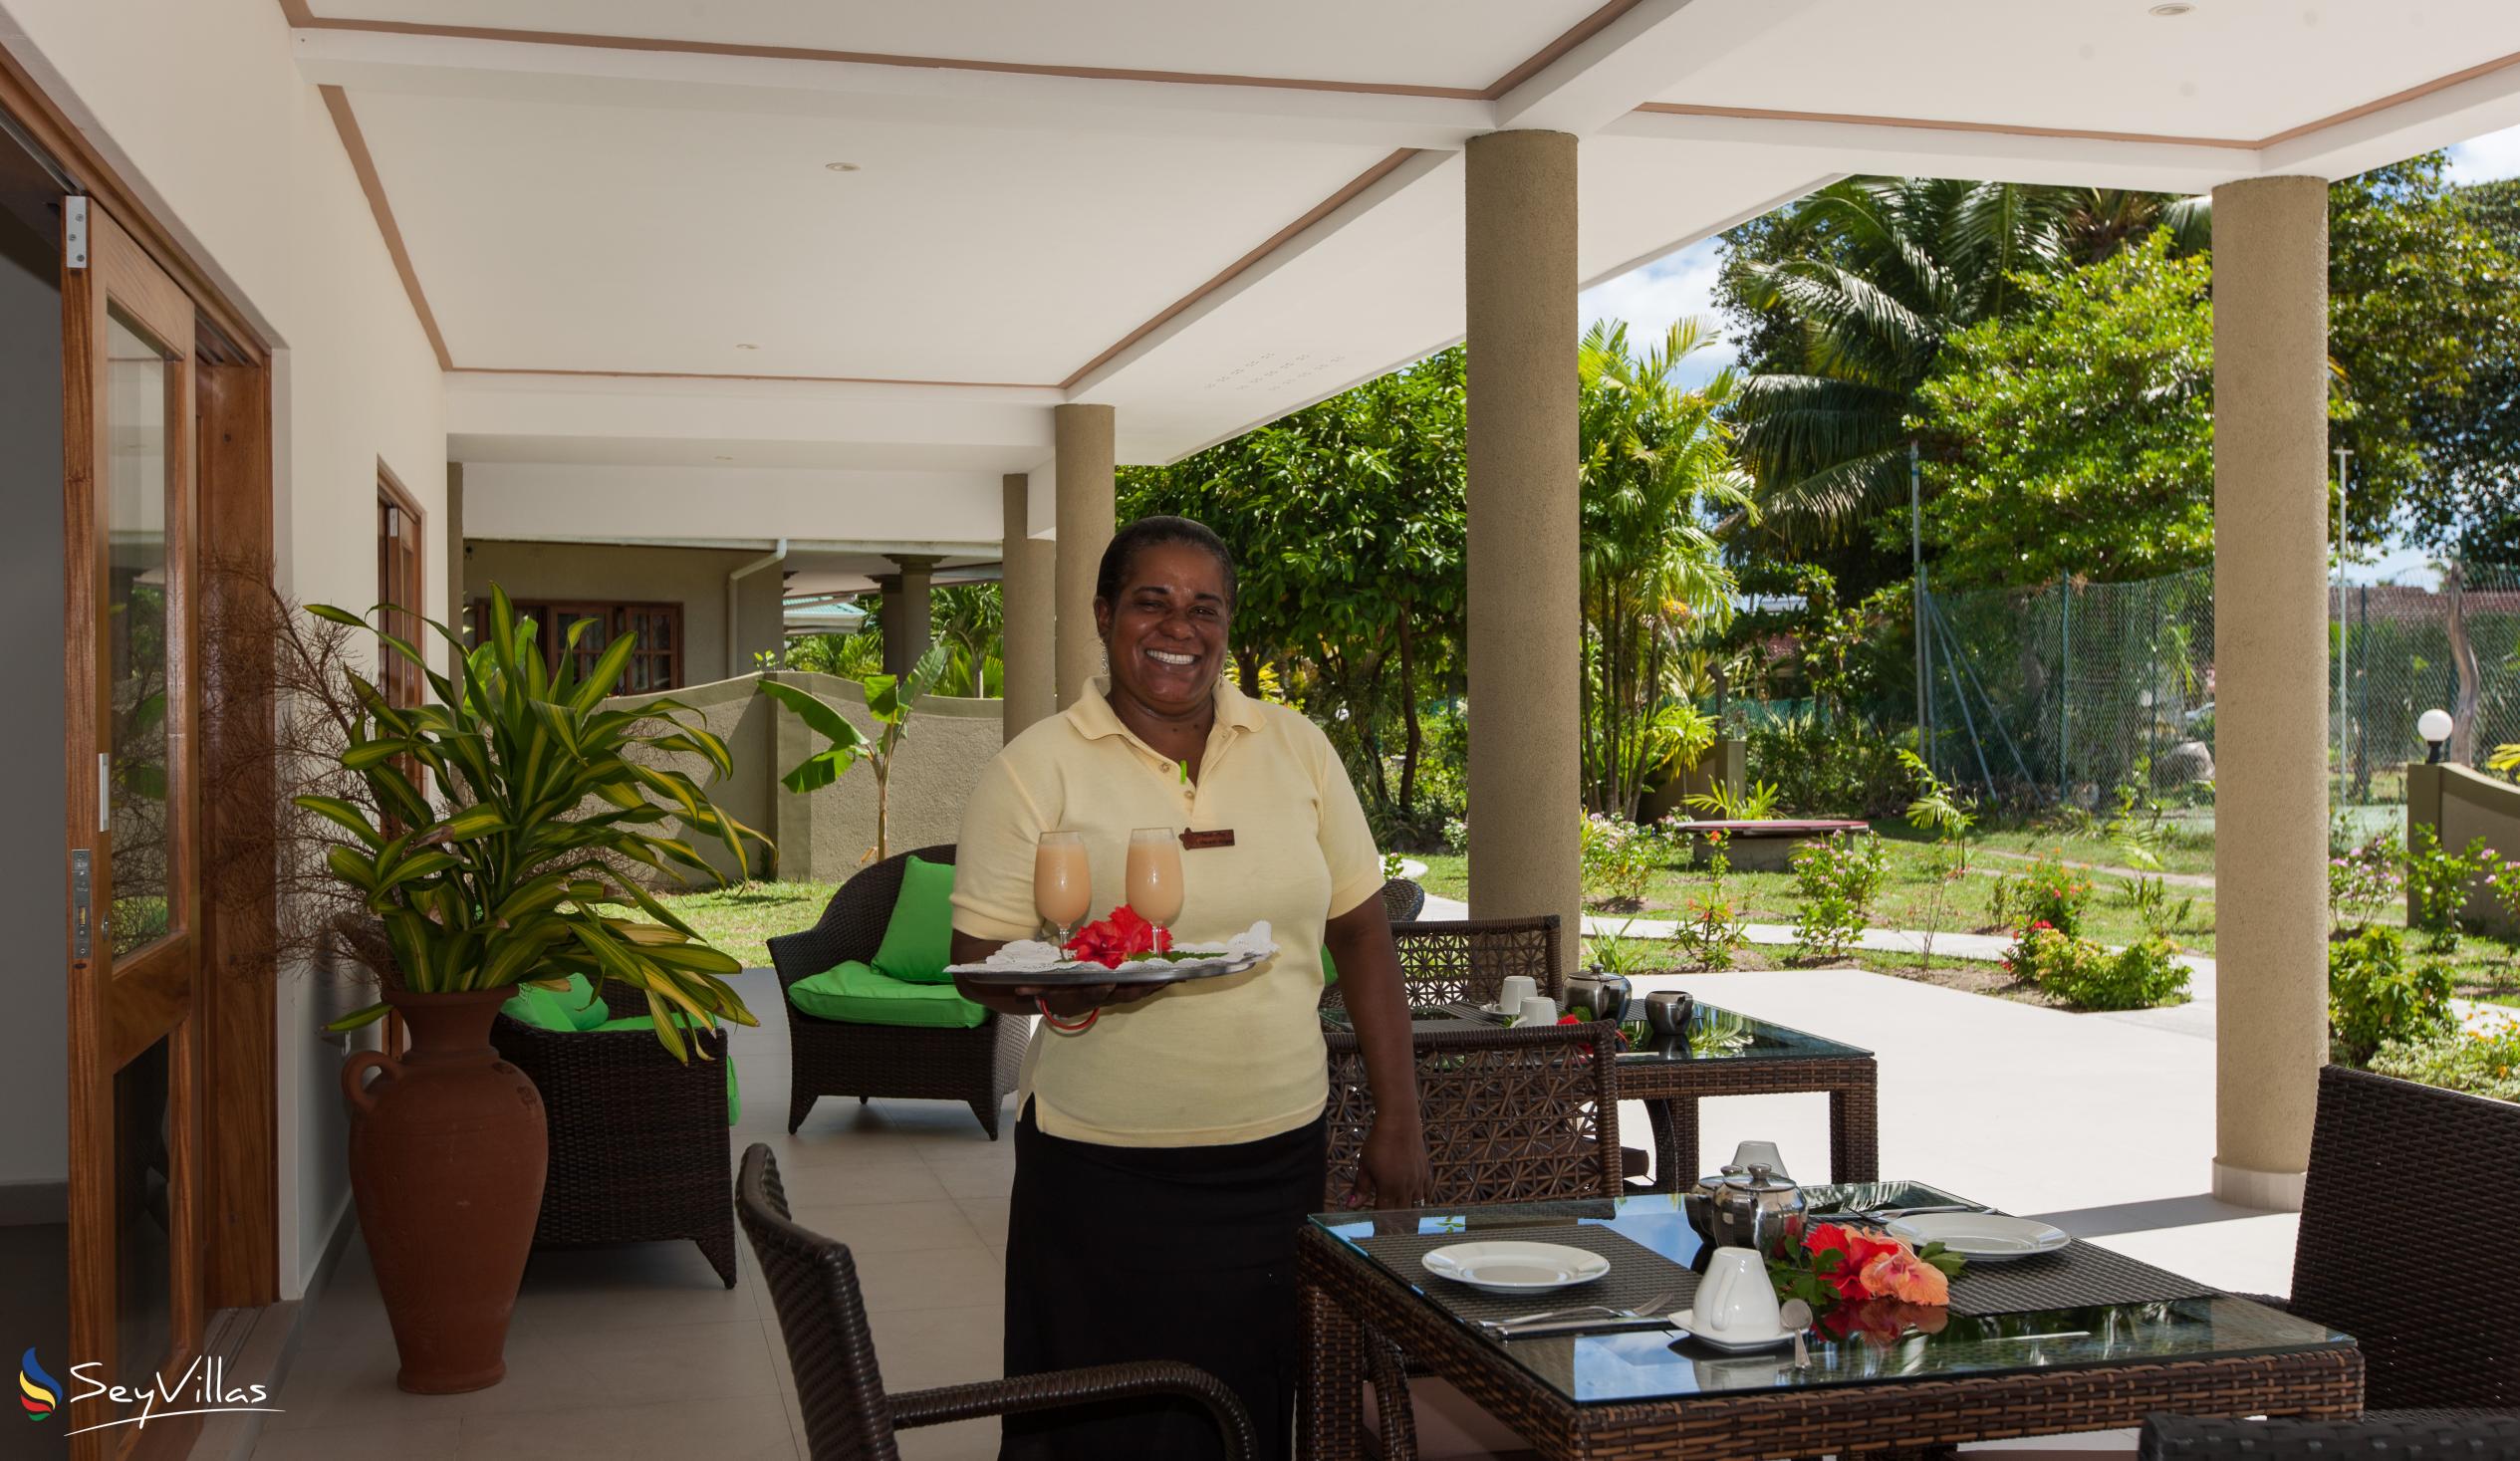 Photo 15: Cote D'Or Chalets - Outdoor area - Praslin (Seychelles)